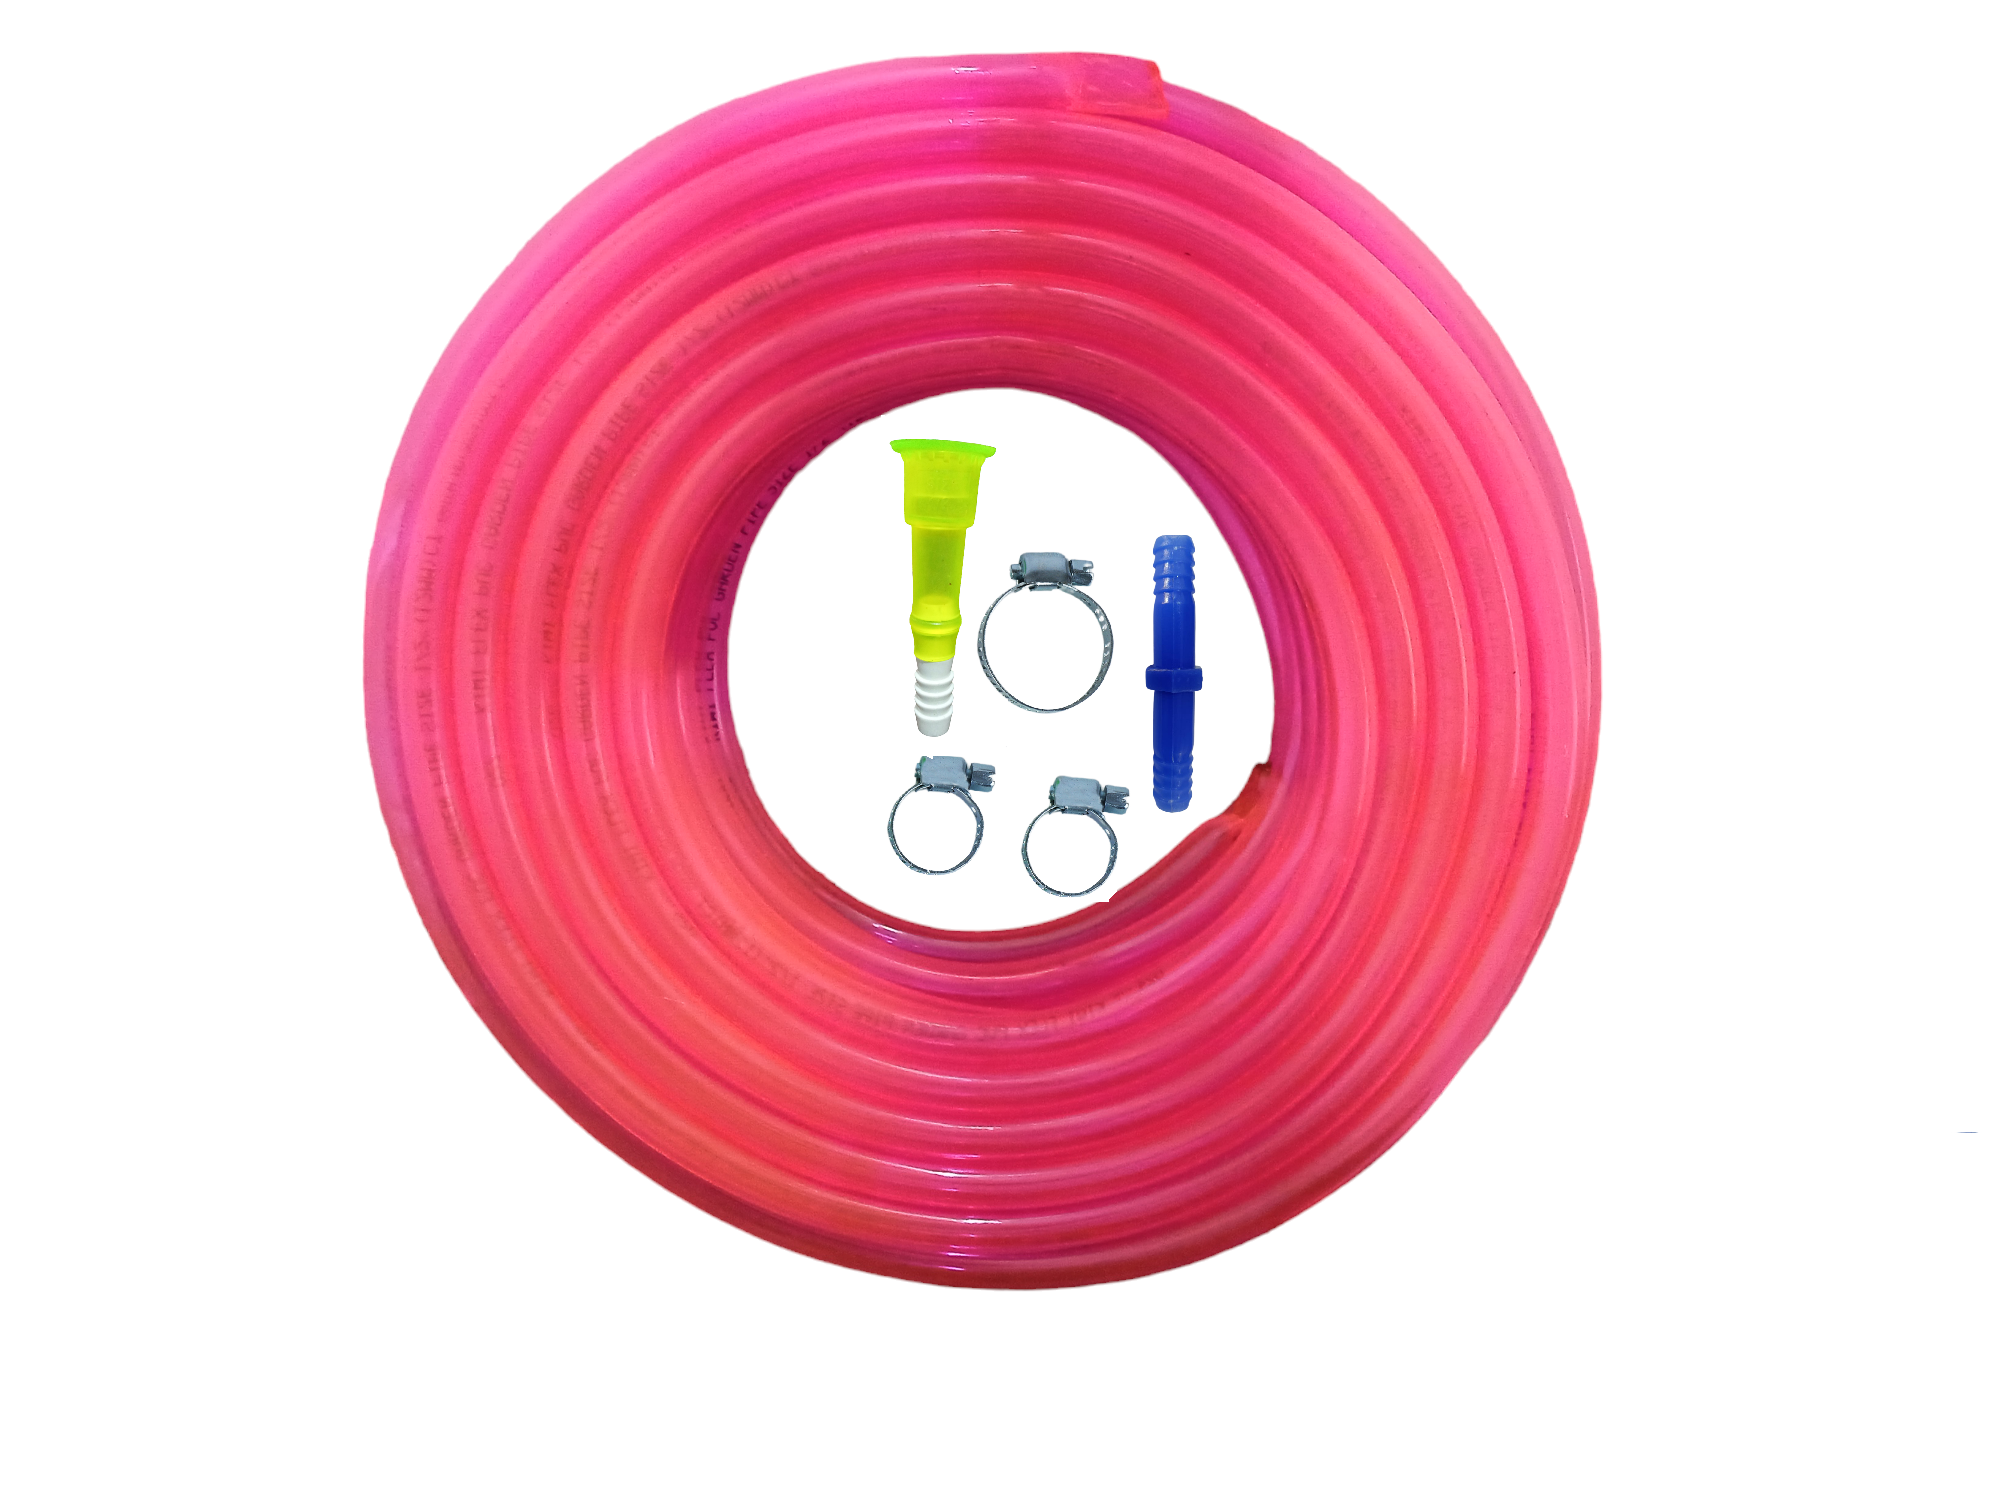 Utkarsh PVC Transparent Garden Water Hose Pipe (3"/4 Inch) + 1 Tap Adapter, 3 Clamps & Jointer for Garden, Car Wash, Floor Clean, Pet Bath, Easy to Connect Indoor/Outdoor Use (Multicolor)